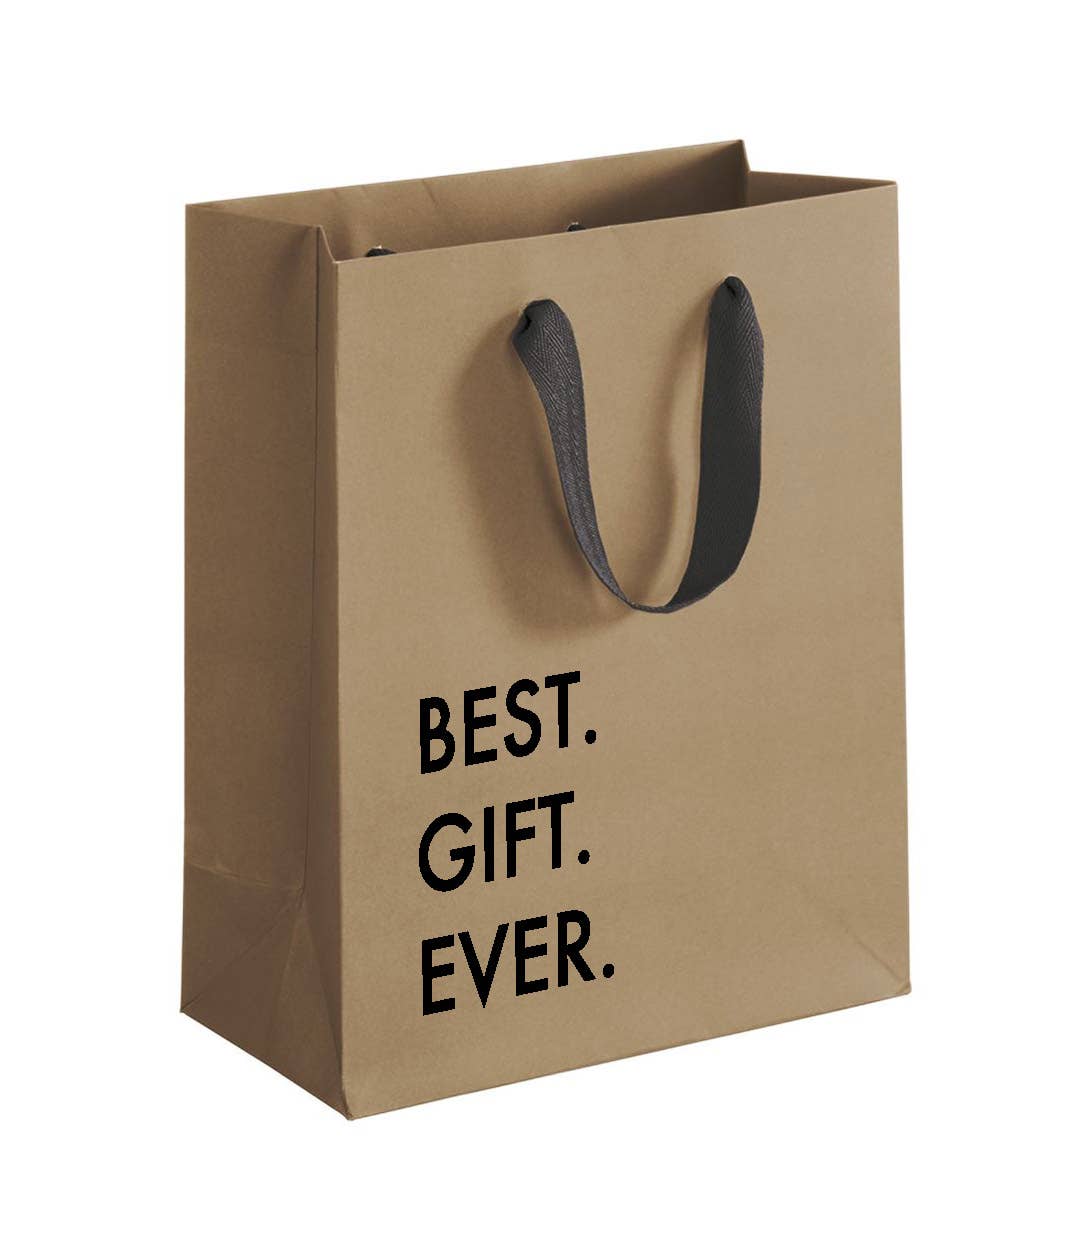 Best. Gift. Ever. - Pretty Alright Gift Bag